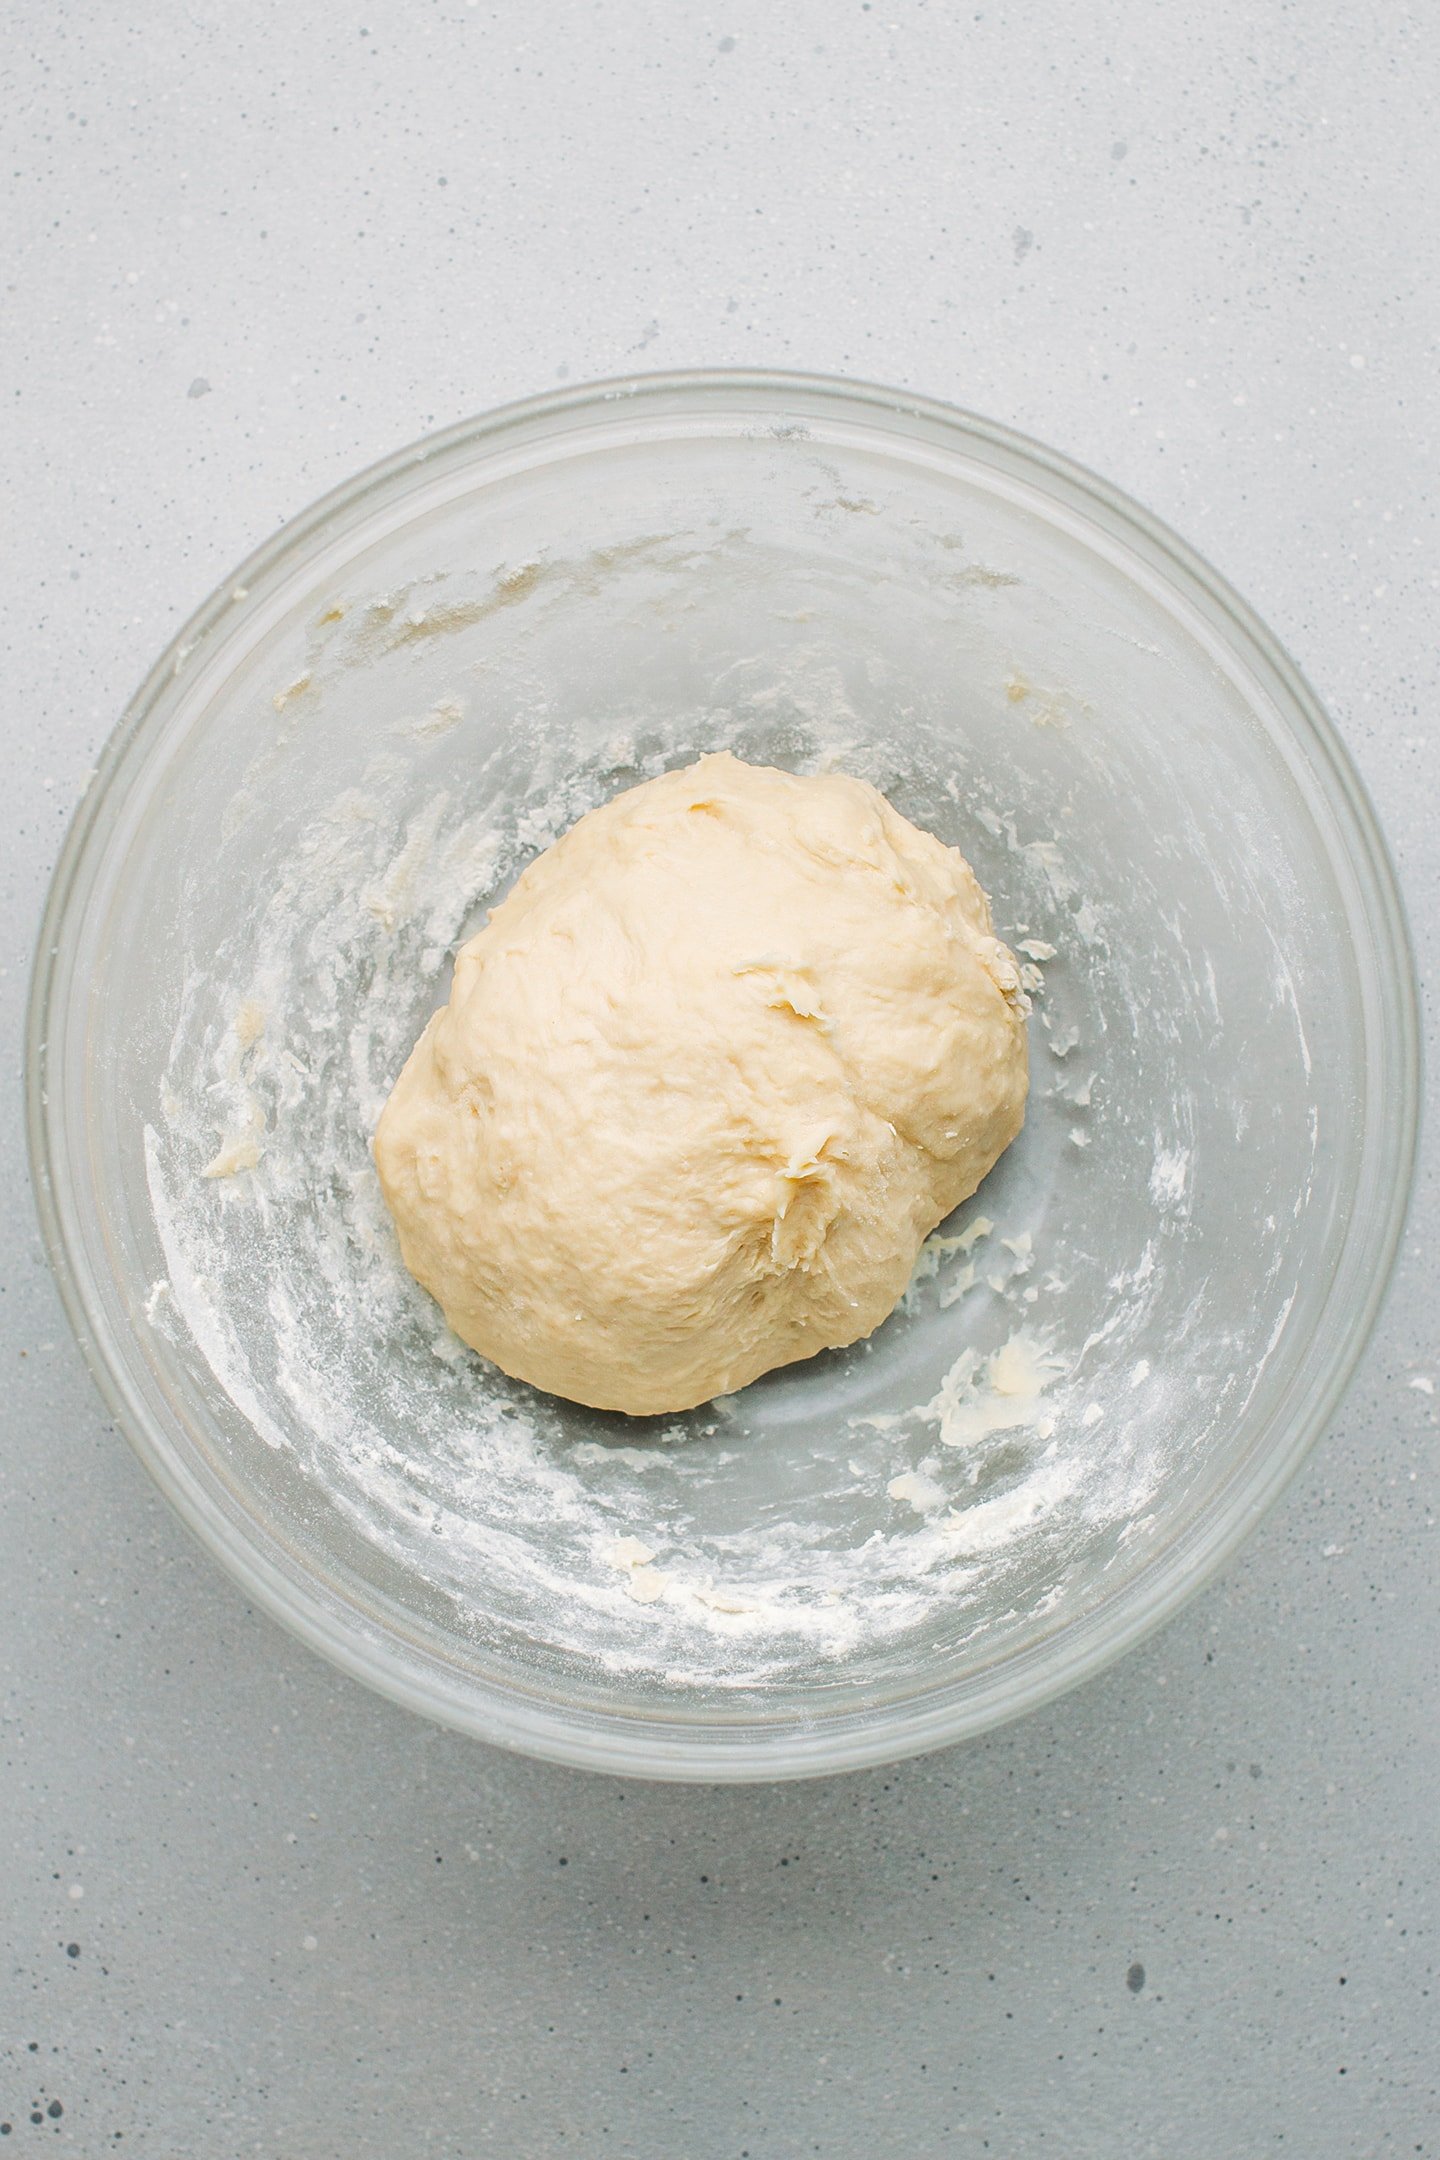 Ball of dough in a mixing bowl.